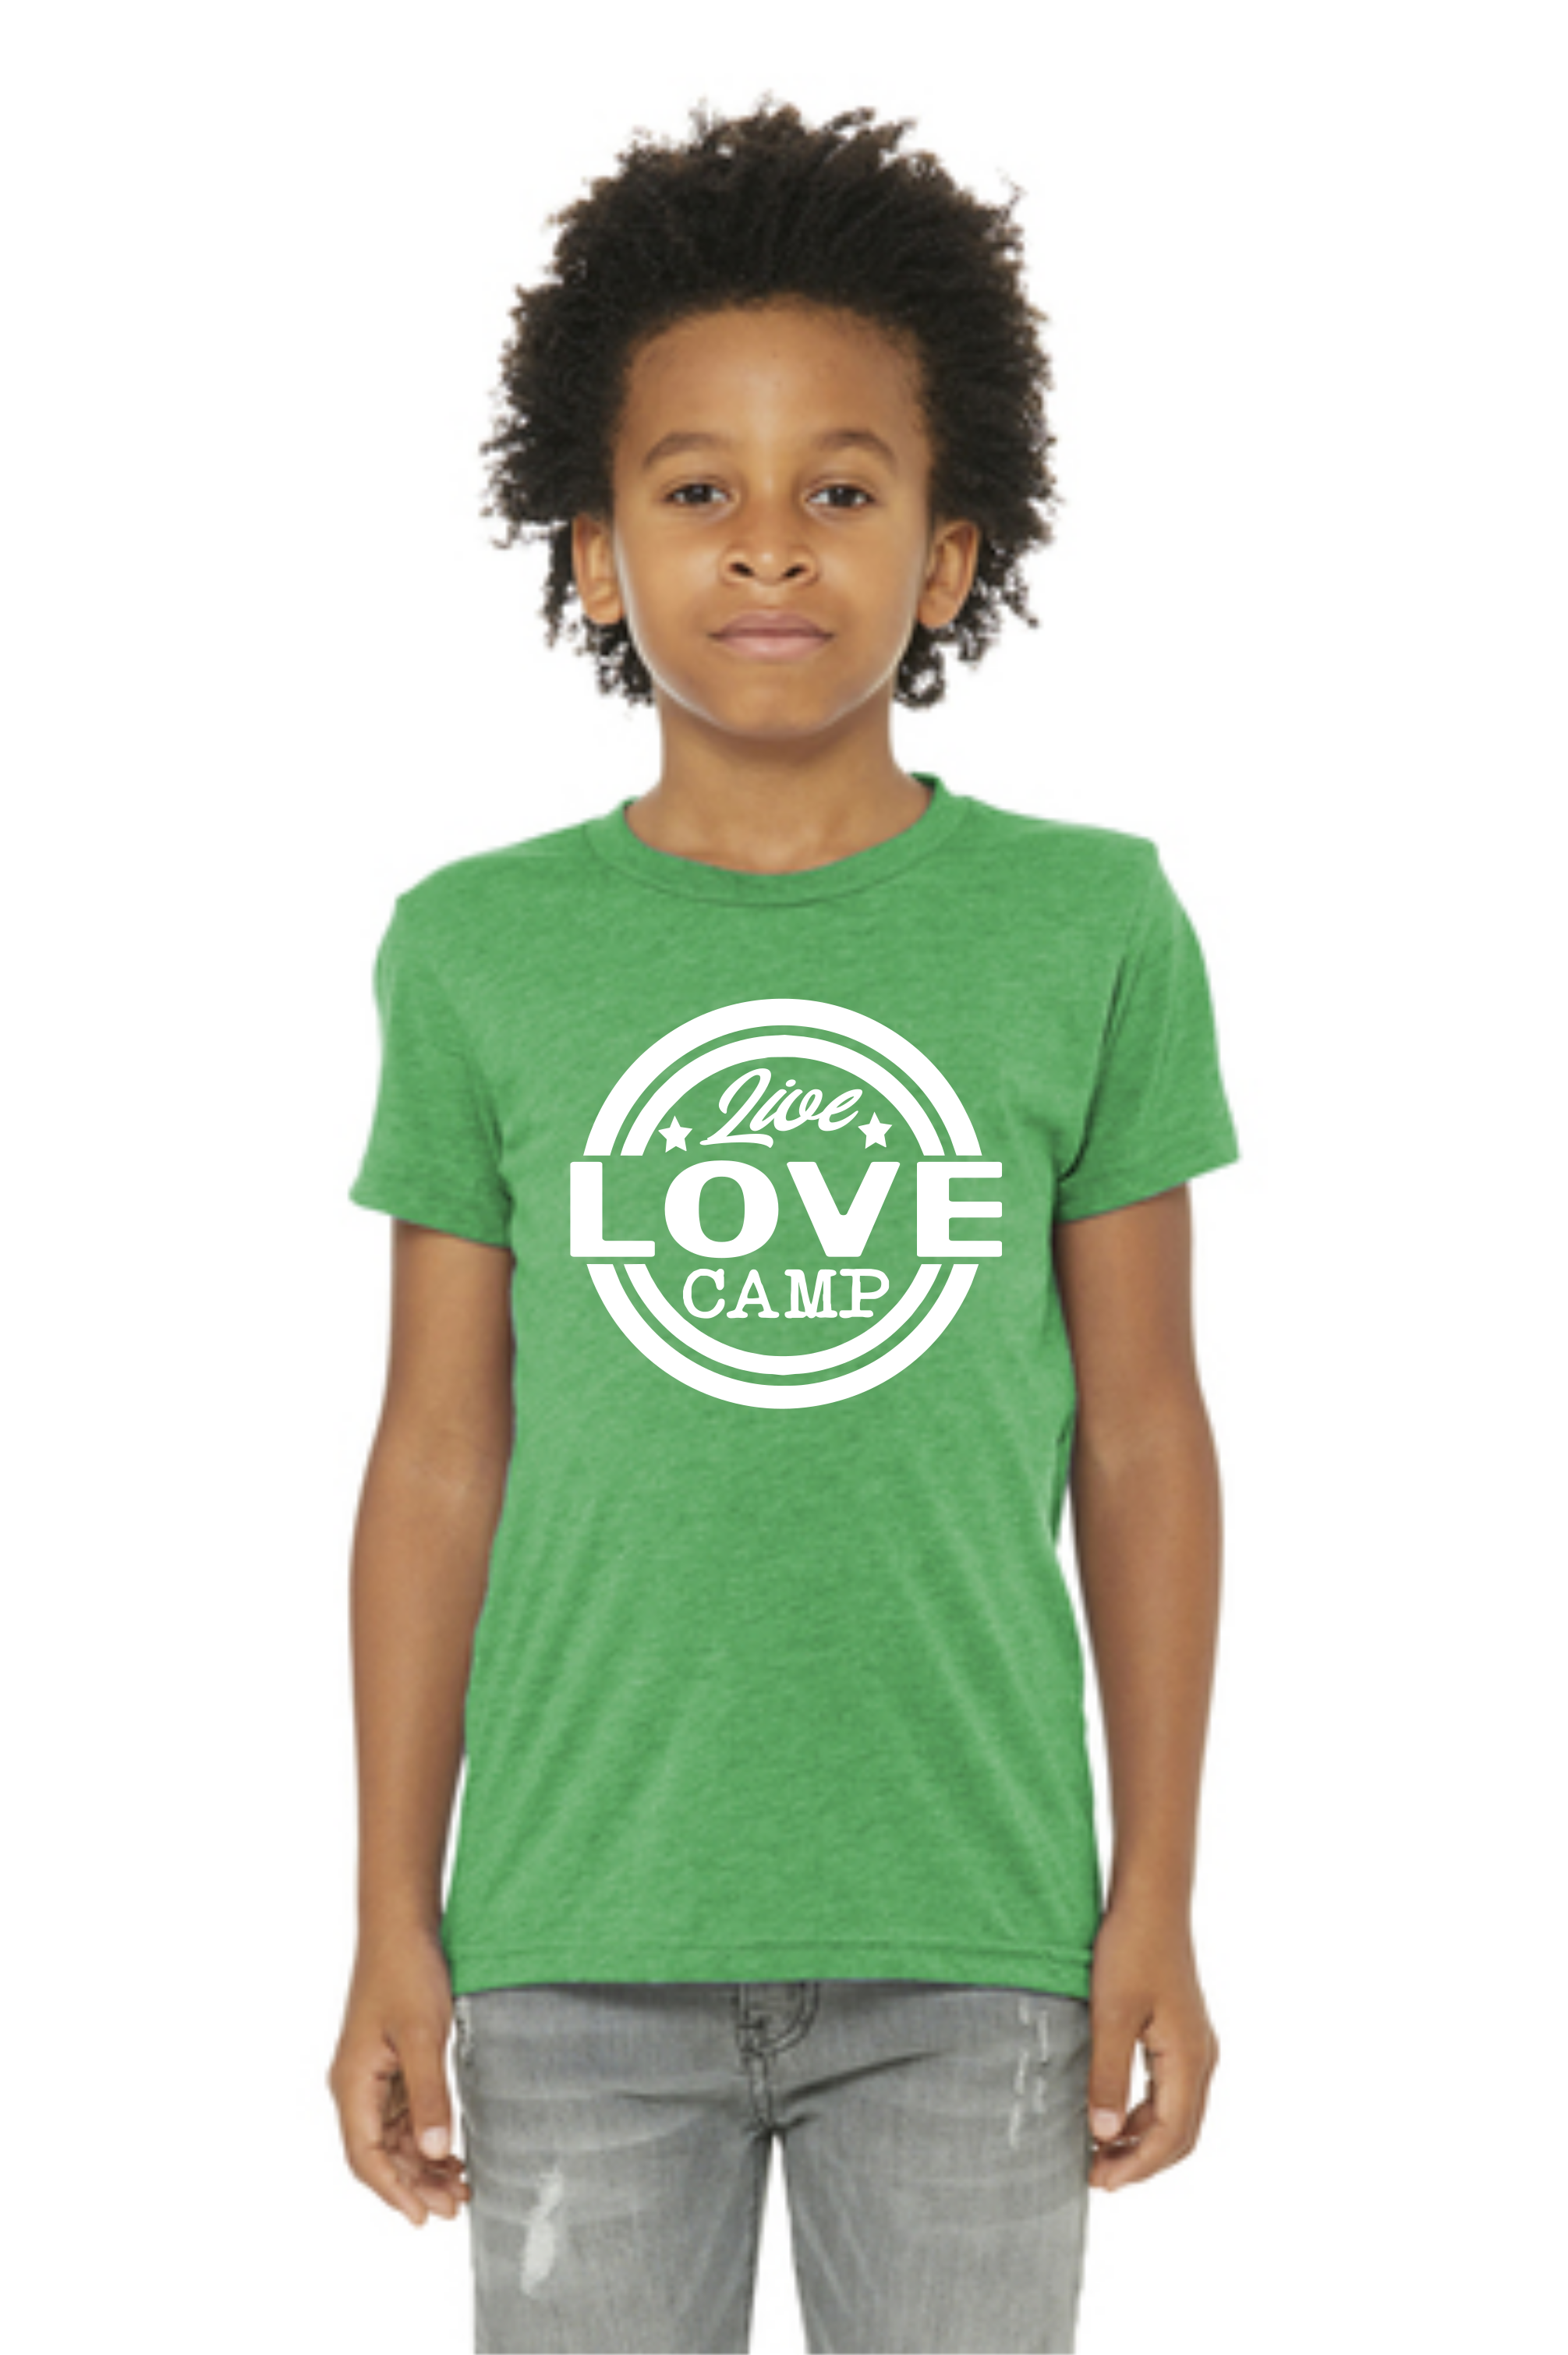 Live Love Camp tee for kids - triblend